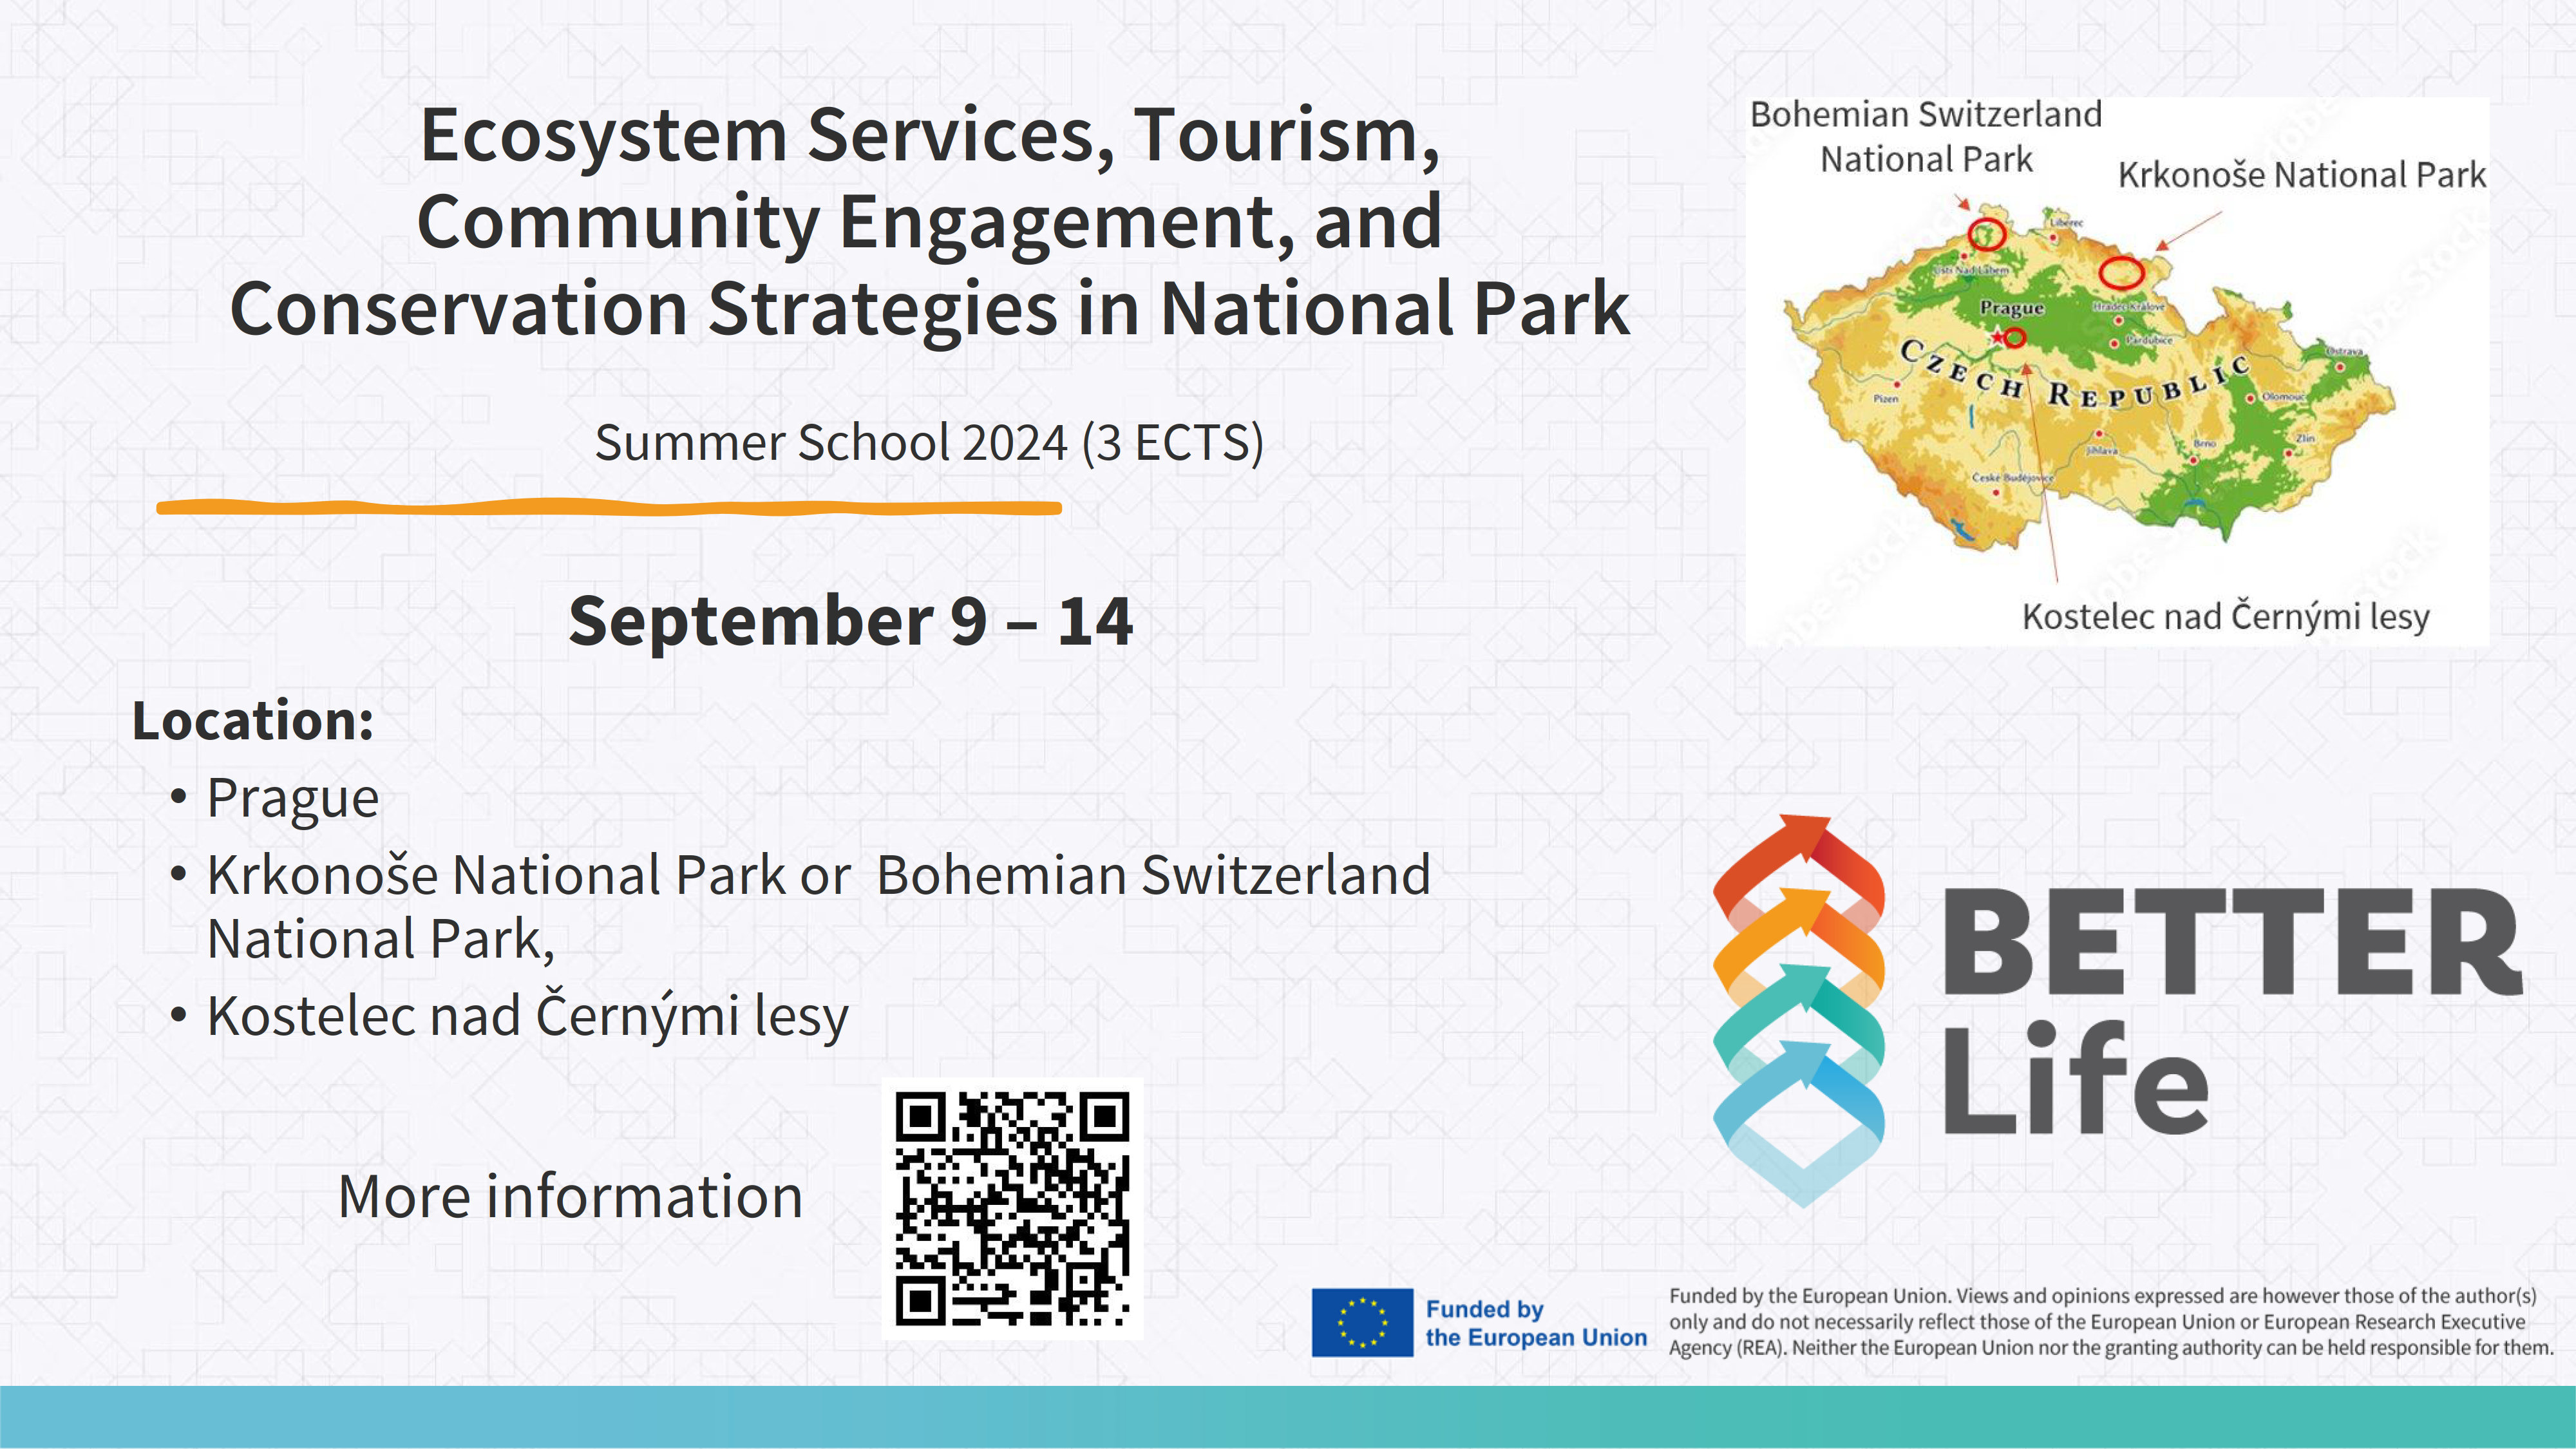 Register Now: Immersive Summer School on Socially Engaged Research in National Parks